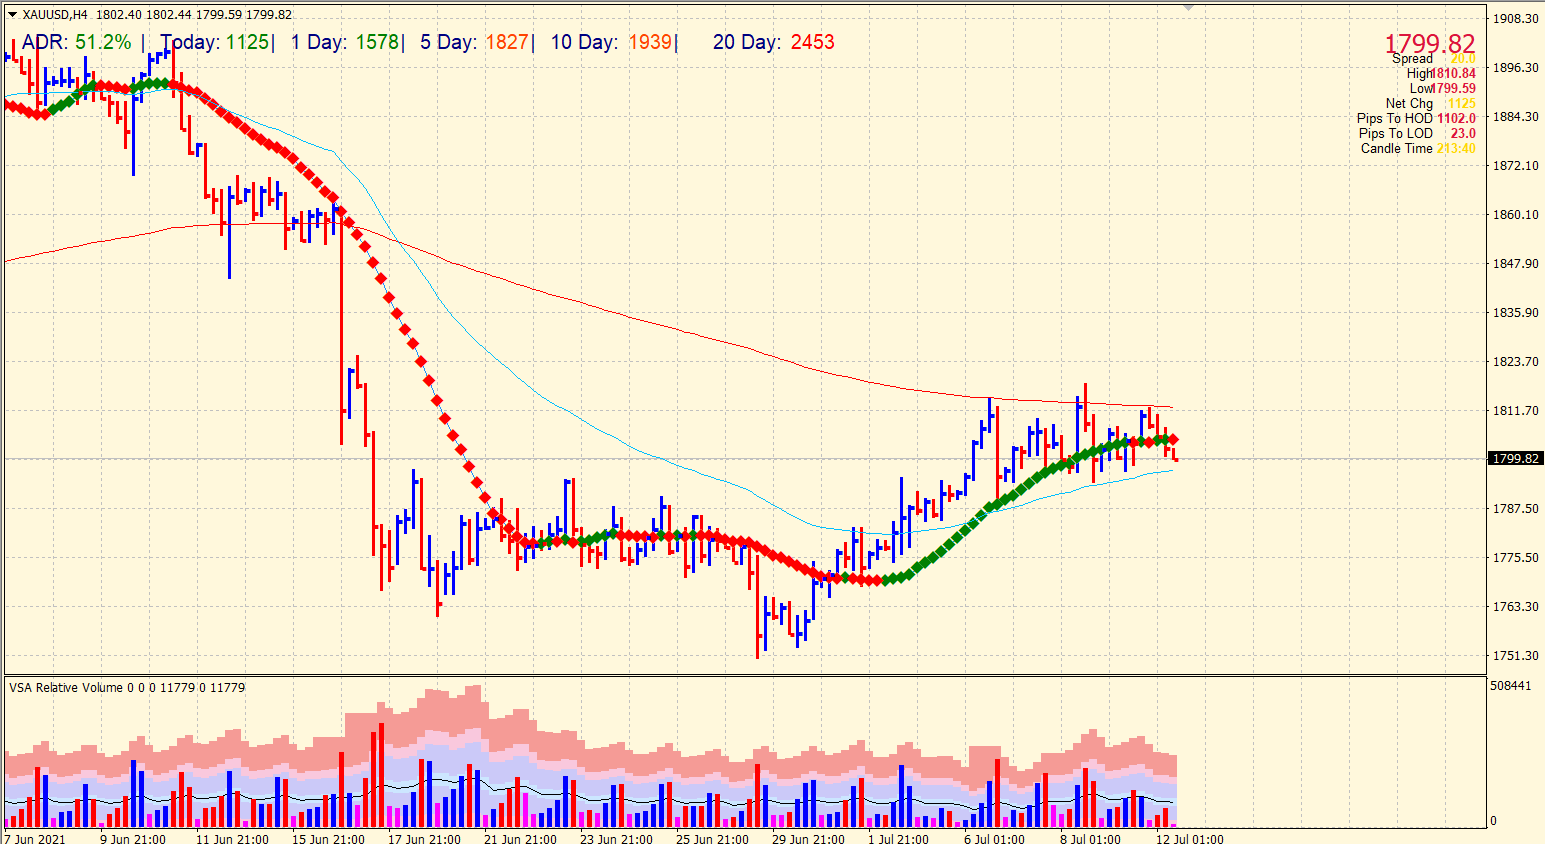 Gold price on 4-hour chart